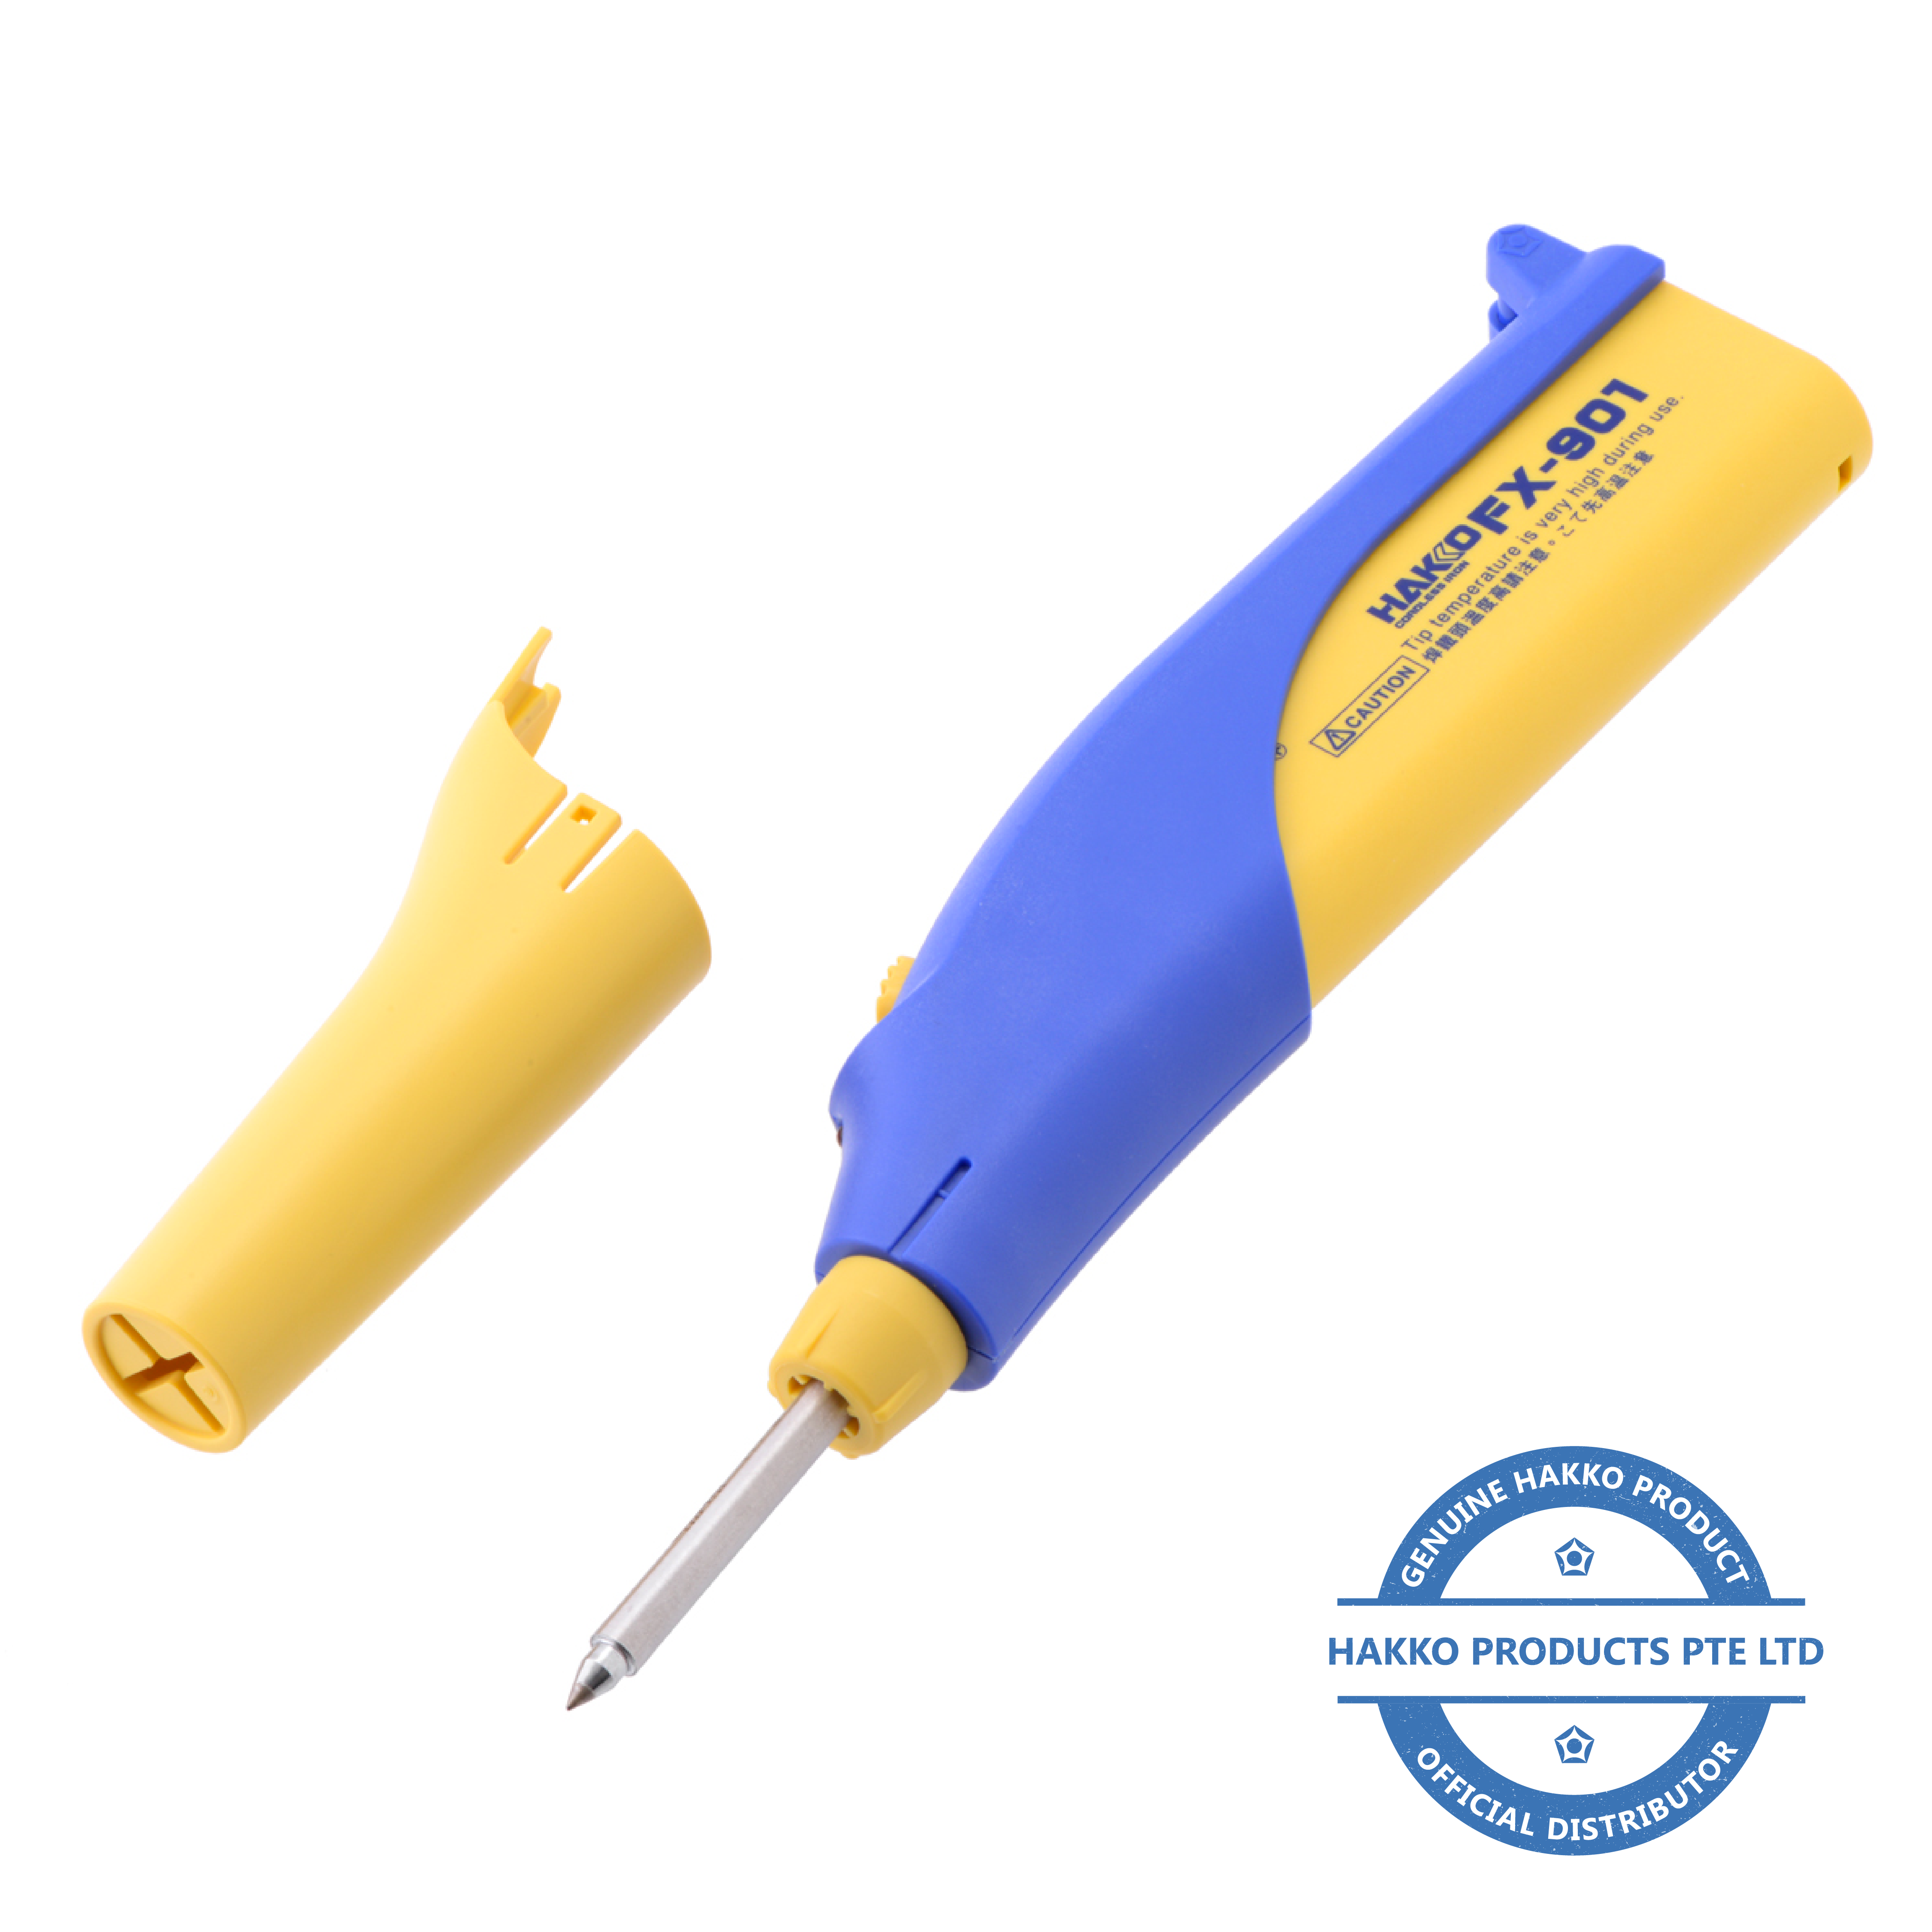 Hakko Fx901 01 Cordless Soldering Iron Hakko Products Fx901 Fx 901 Wireless Portable Battery Operated Soldering Iron Soldering Tip Soldering Station Equipment Rework Repair Simple Equipment Diy Arts And Crafts Electronic Pcb Jewelry